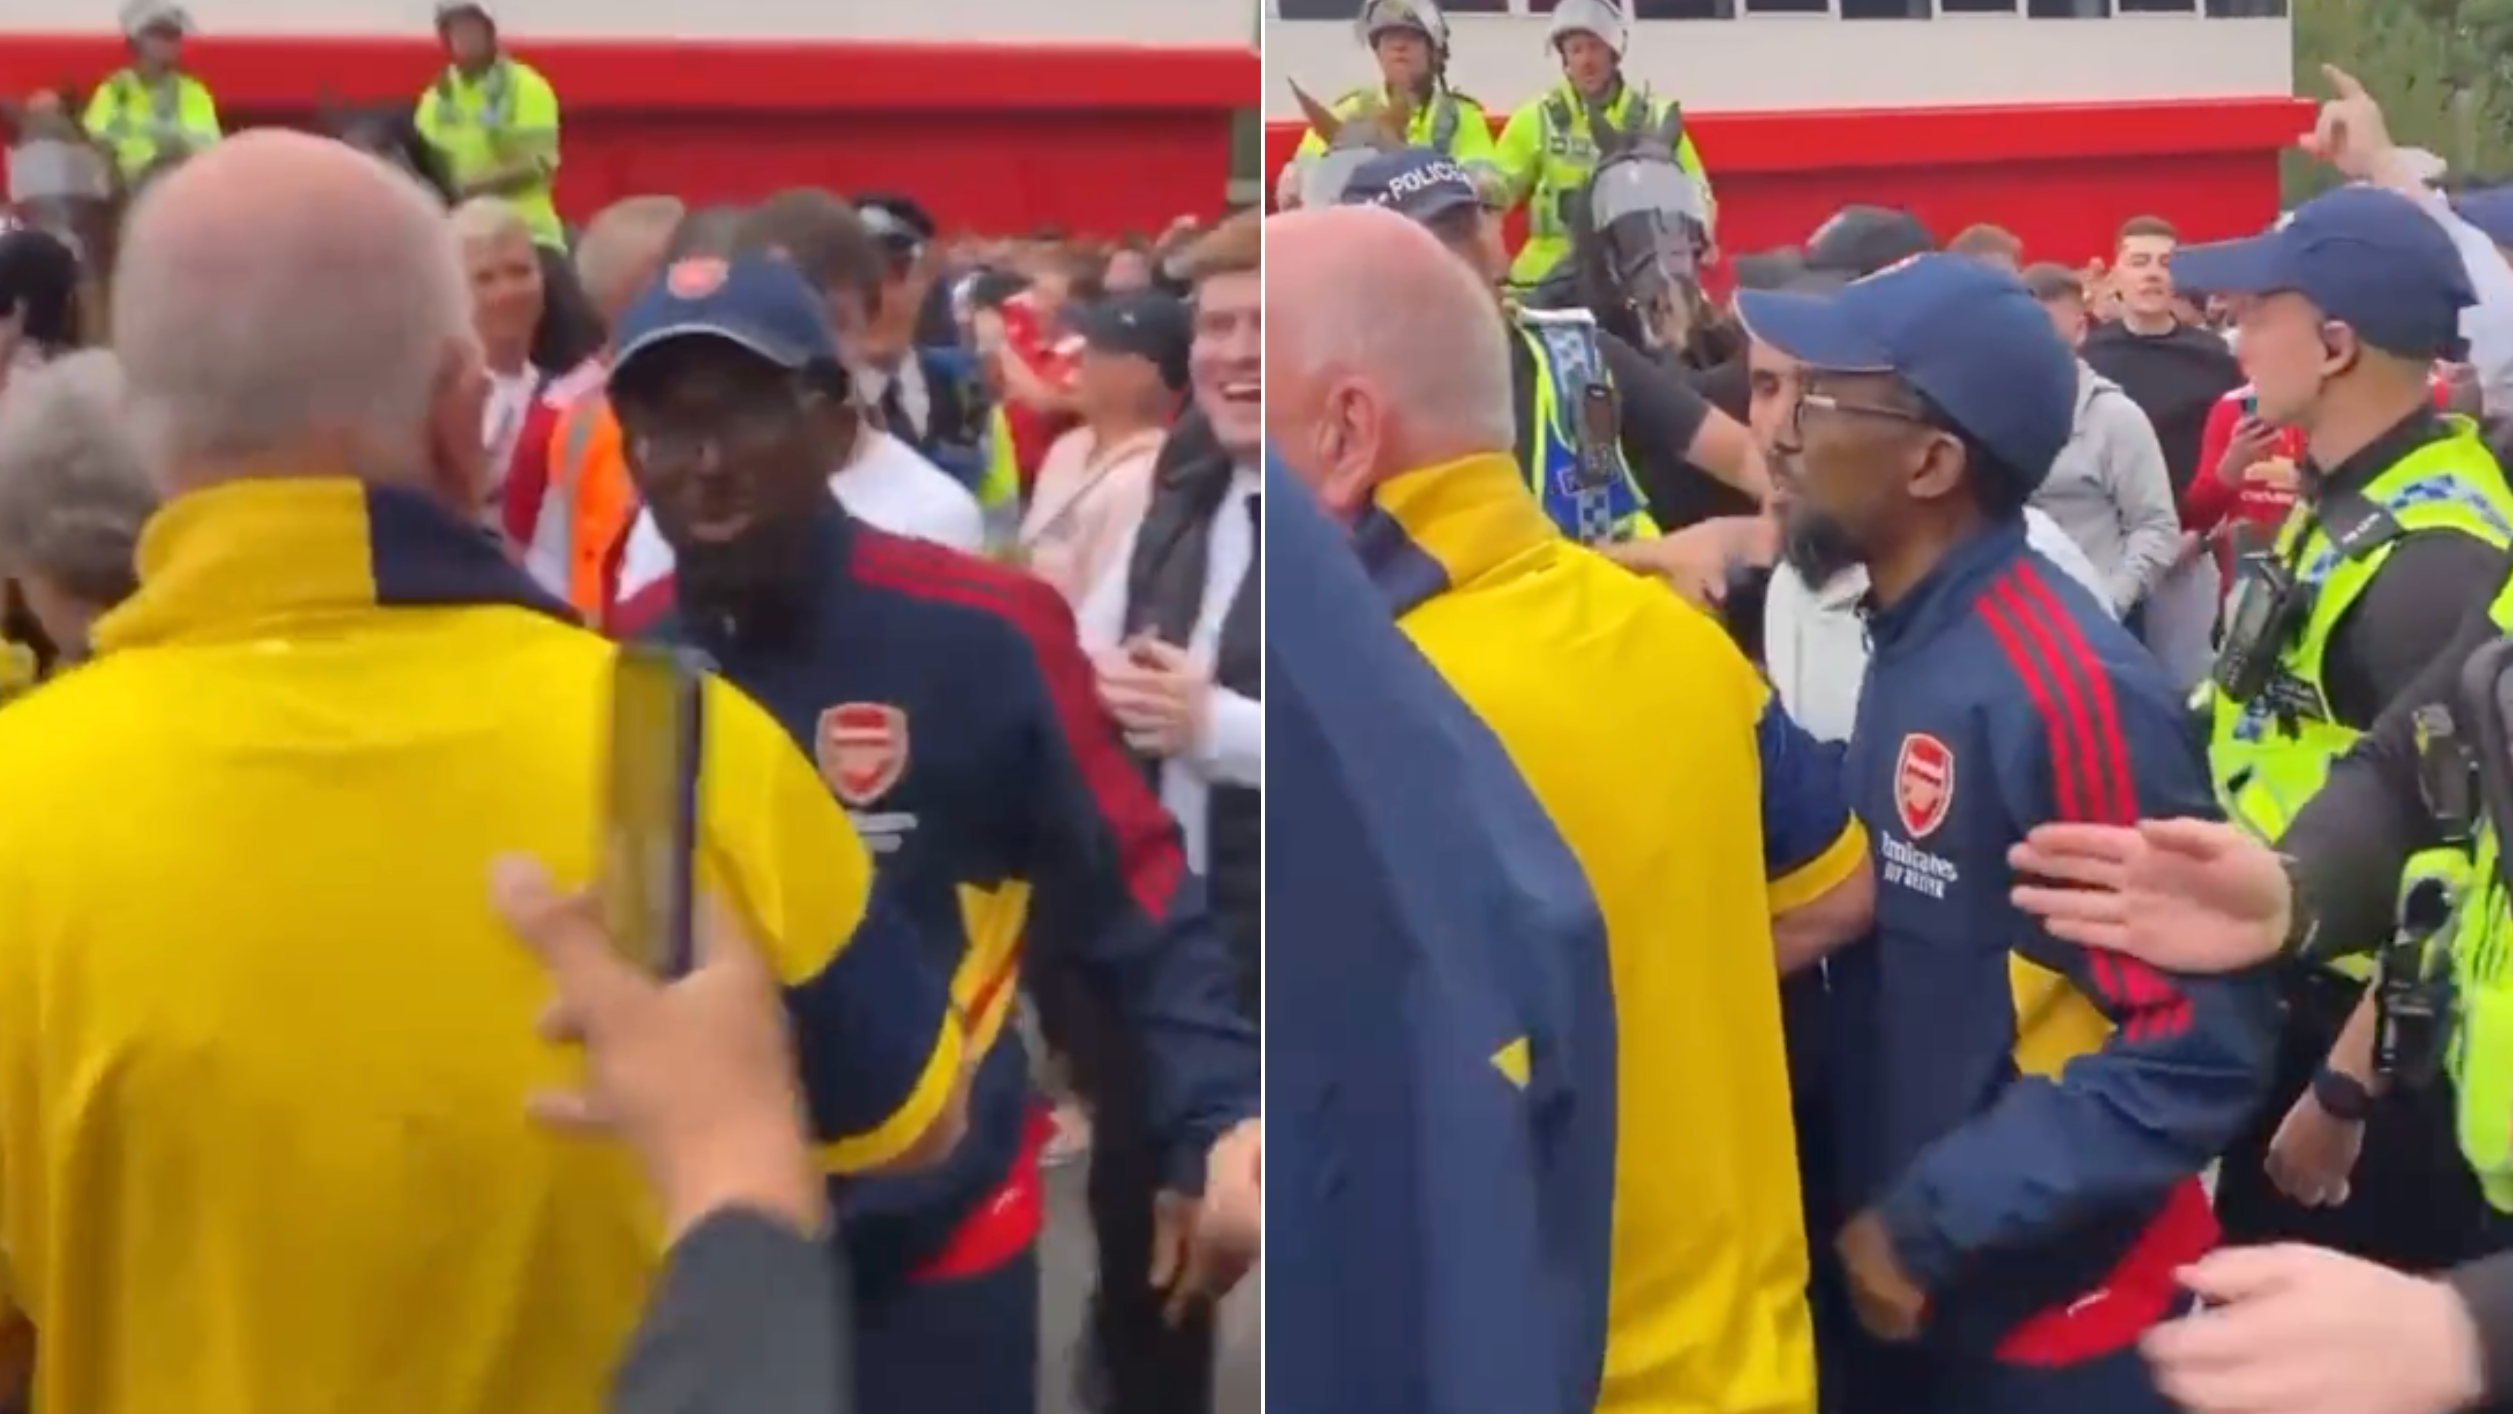 All The Latest Arsenal Fan Tv News, Videos and Breaking Stories SPORTbible